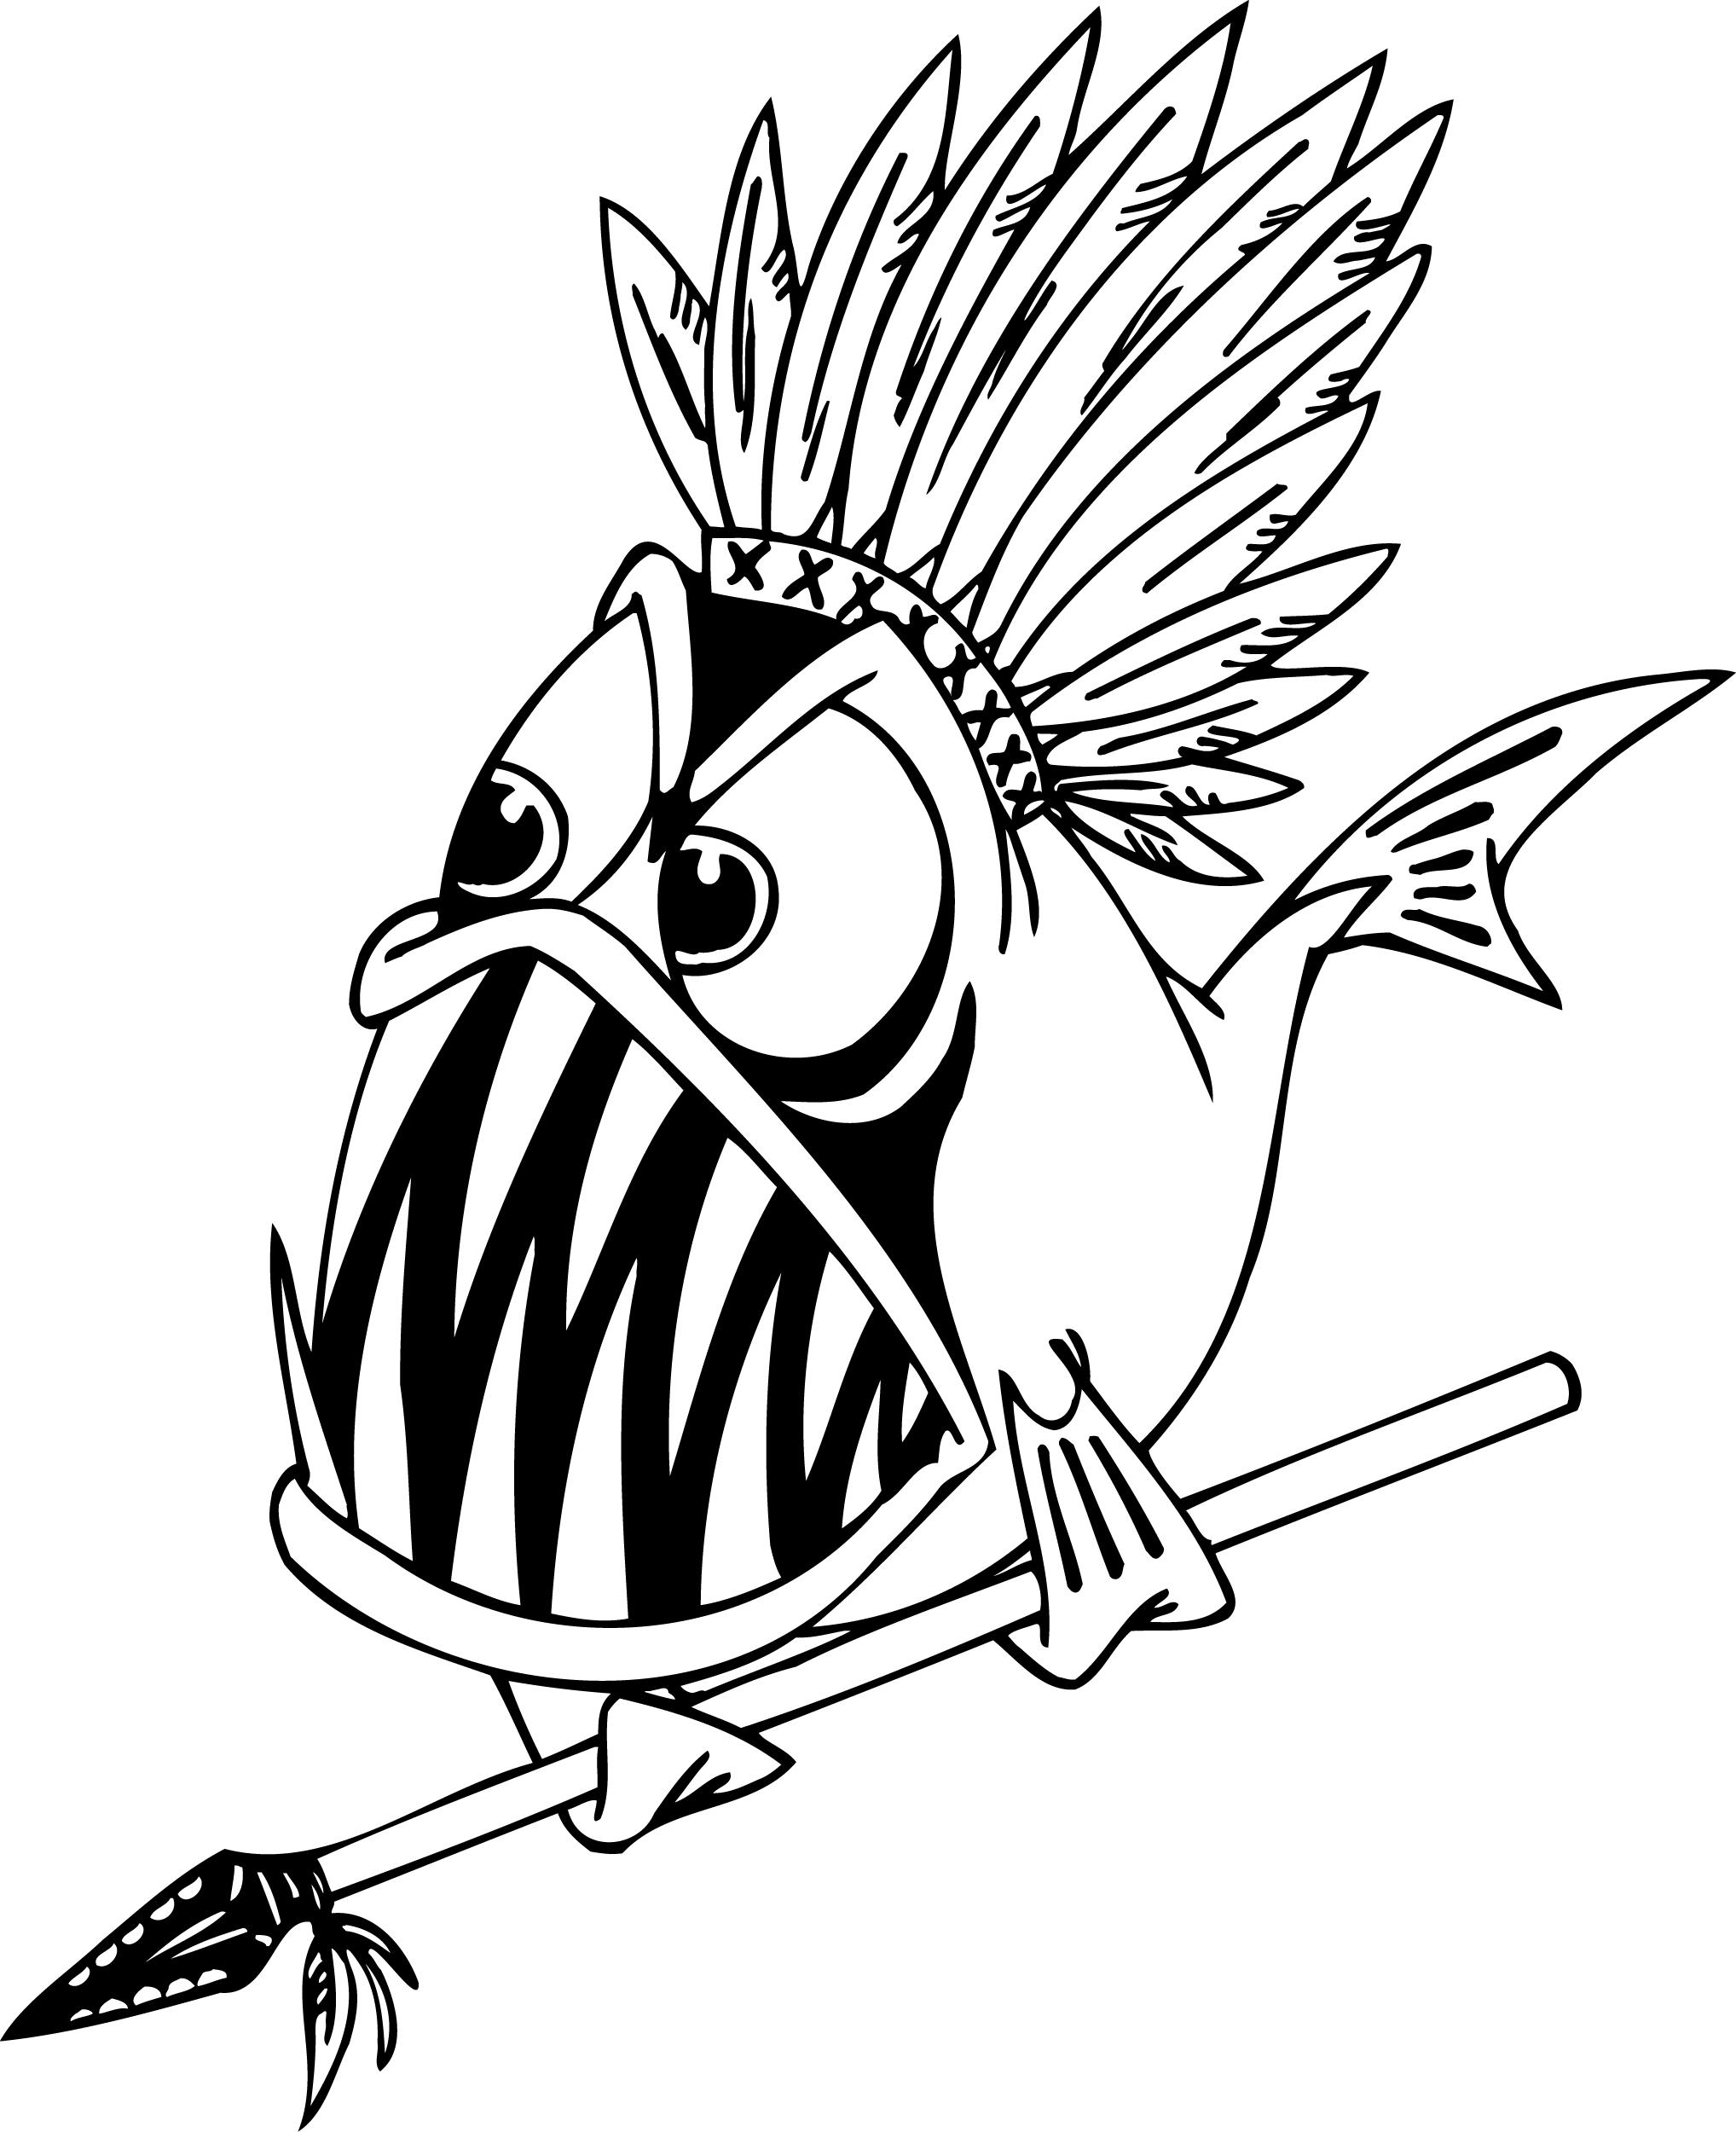 Detailed Fish Coloring Pages - Coloring Home